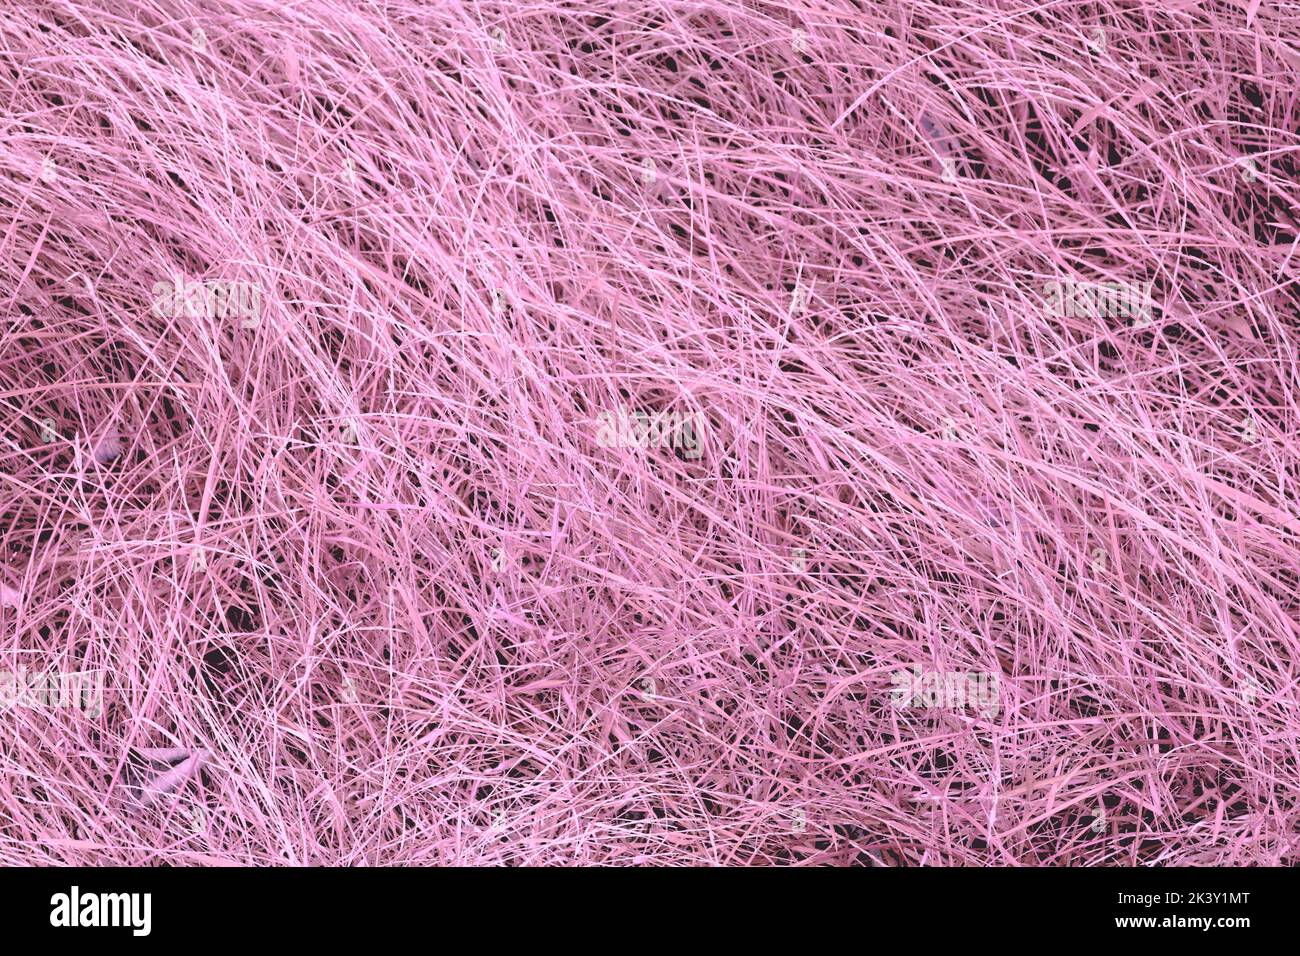 A Simple Pink-Colored Grass Background Stock Photo